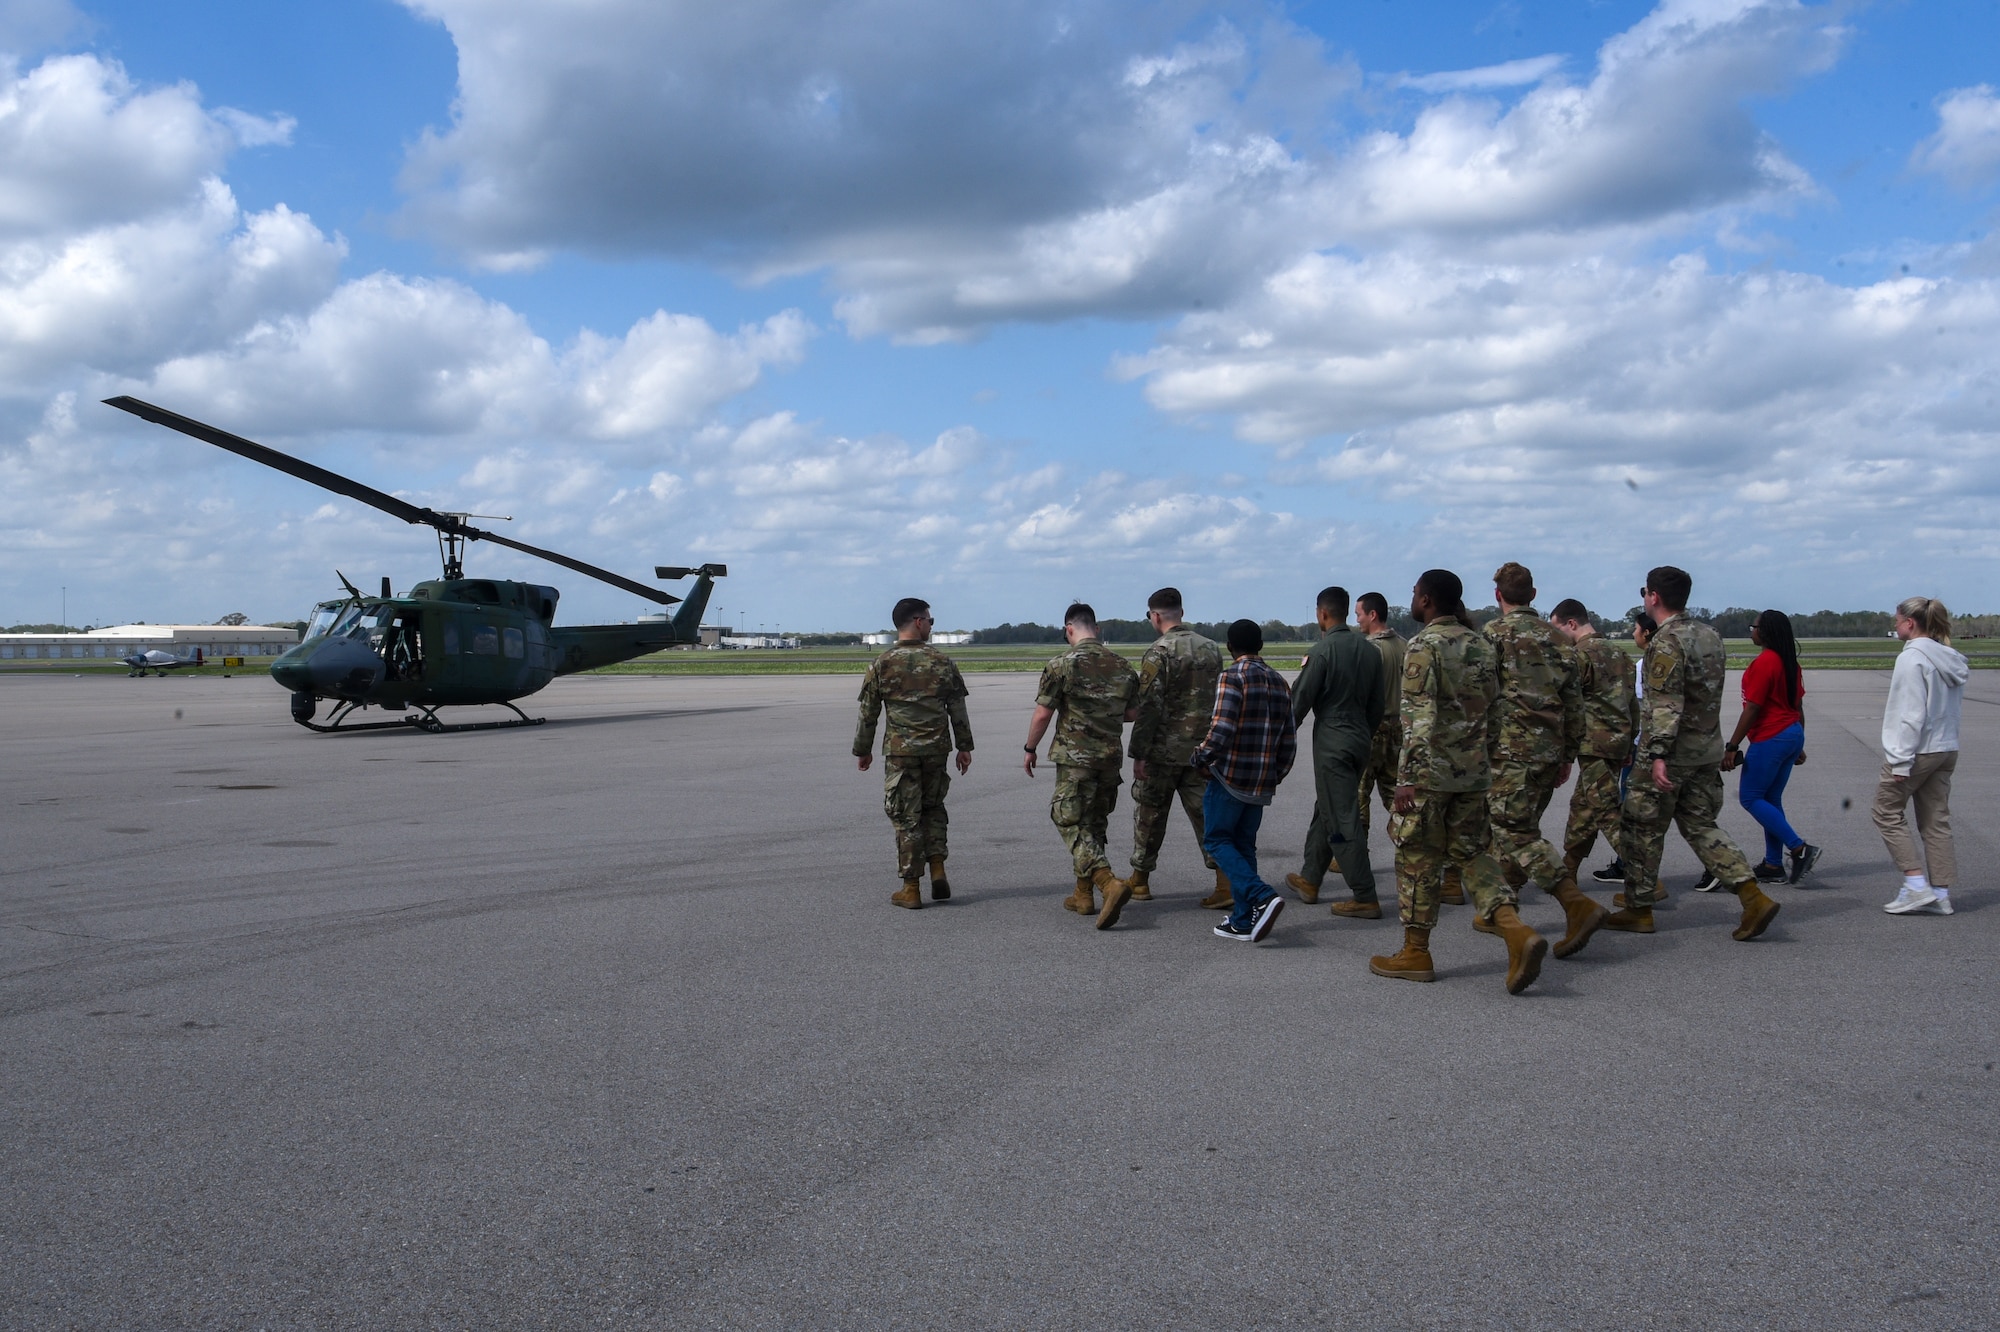 group of ROTC cadets walk to helicopter